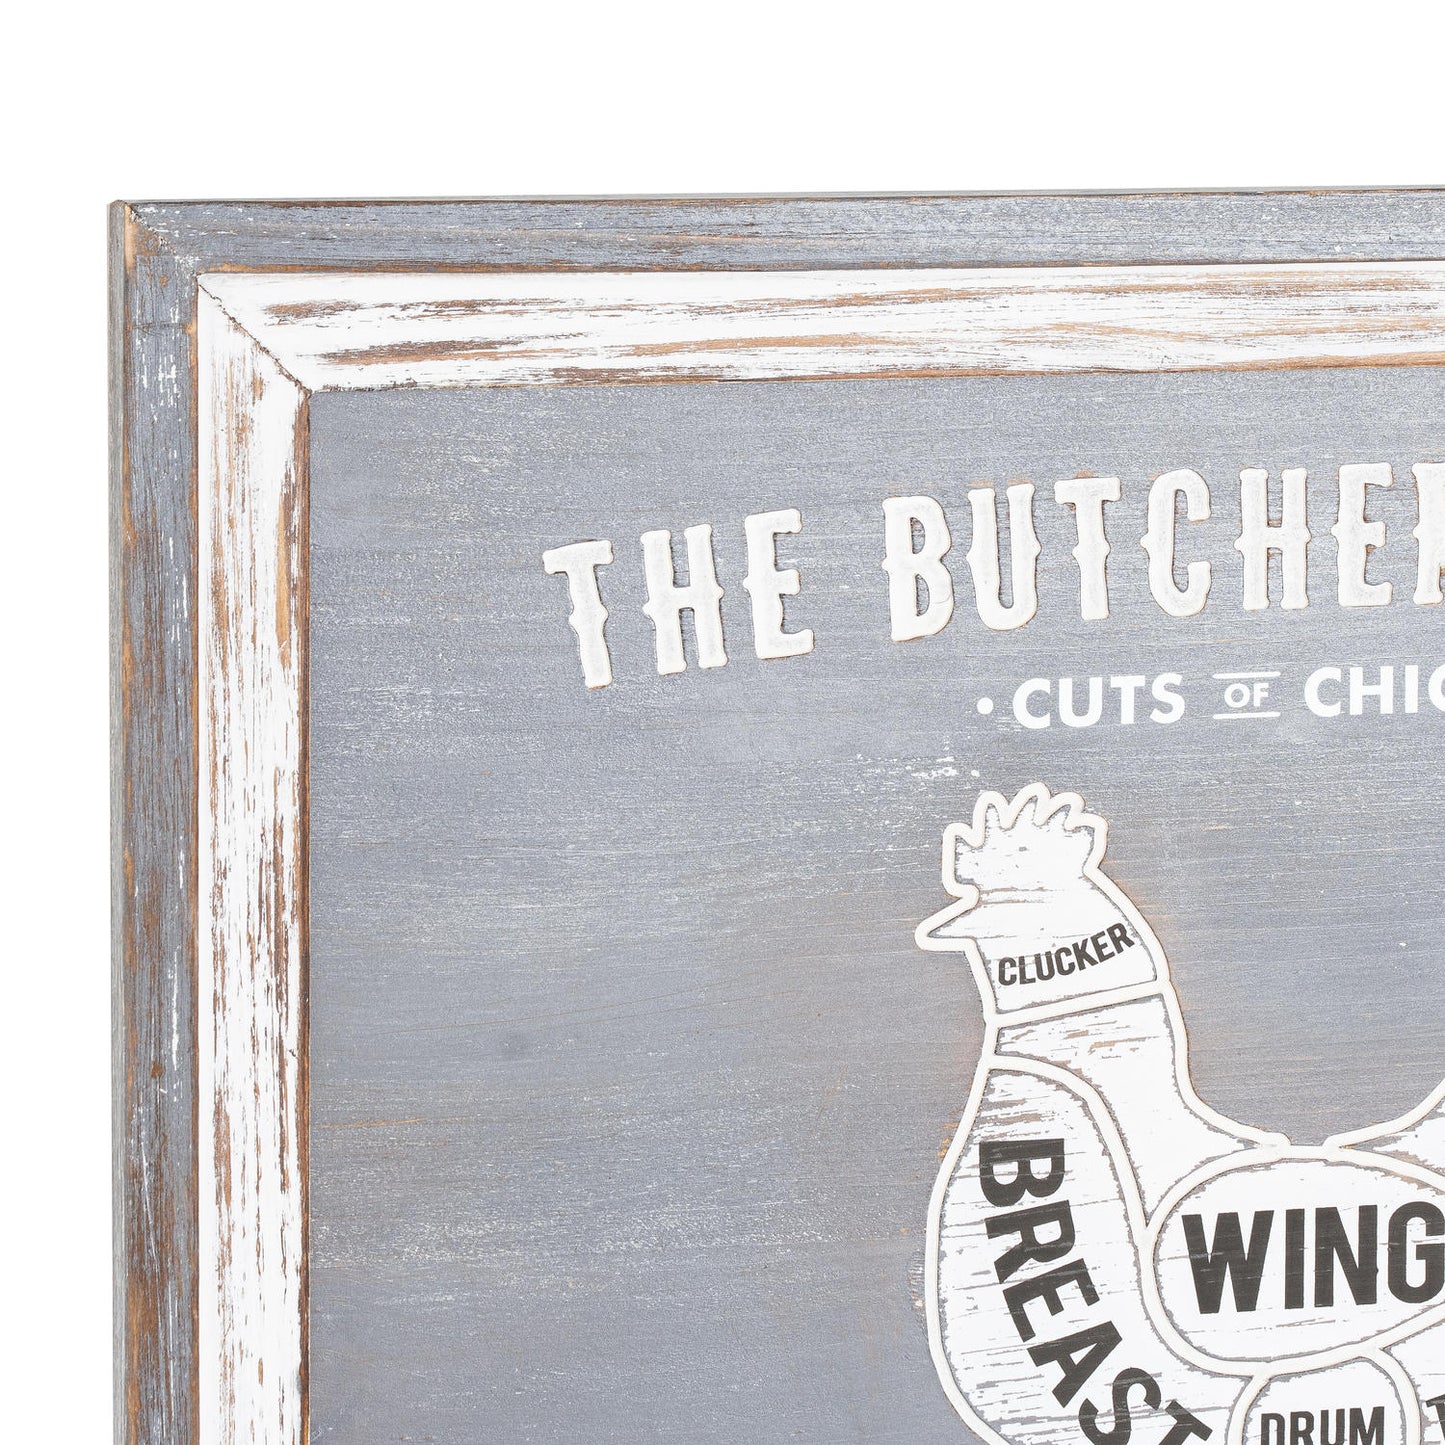 Butchers Cuts Chicken Wall Plaque